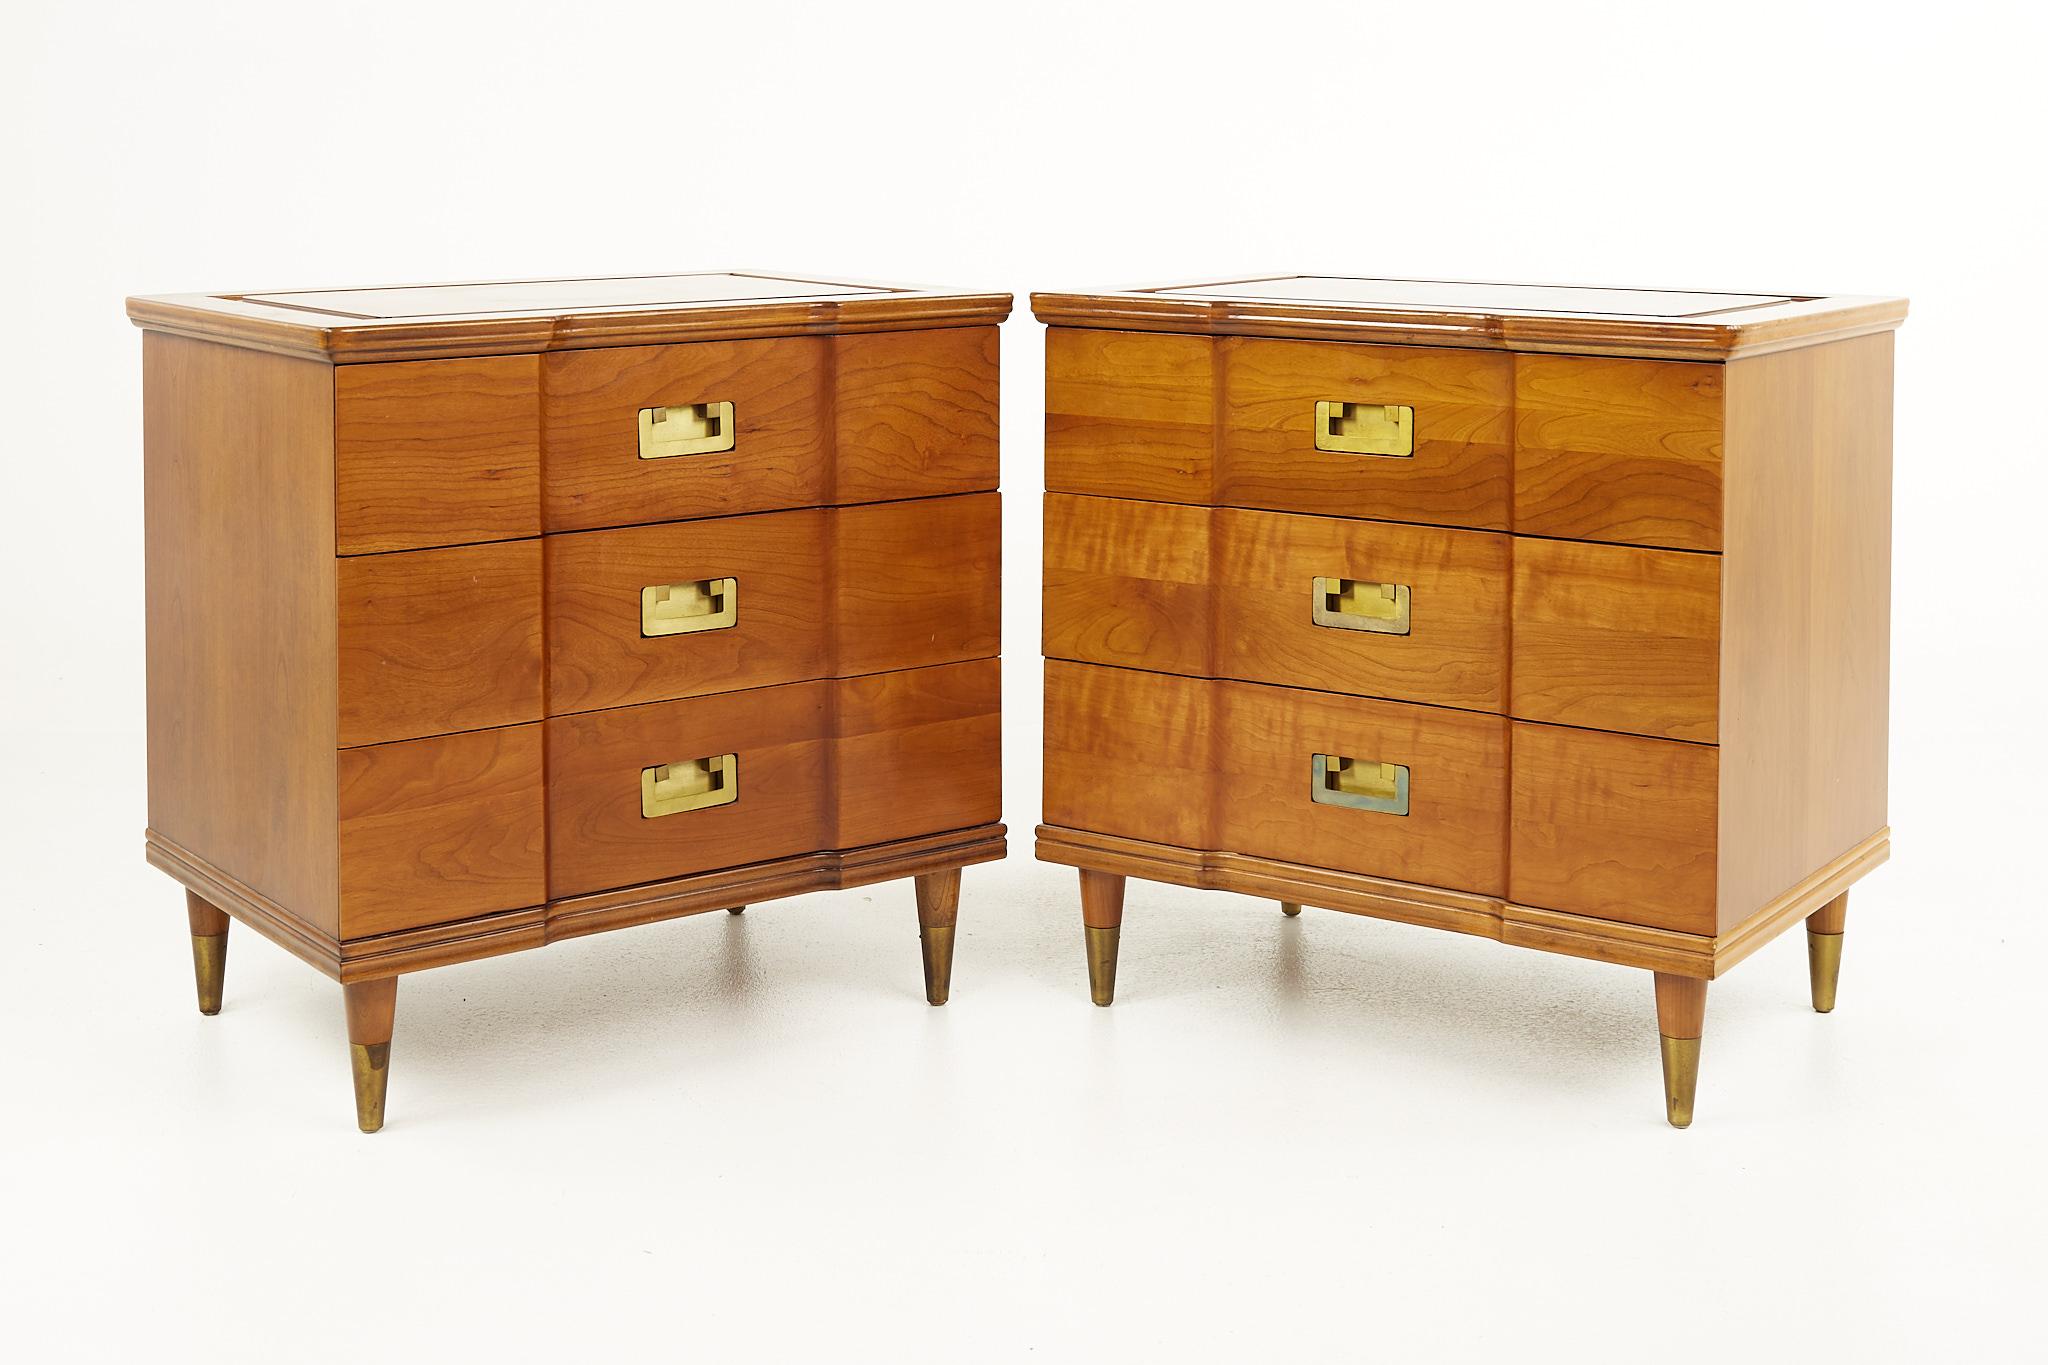 John Widdicomb mid century walnut and brass nightstands - a pair 

Each nightstand measures: 25 wide x 18 deep x 24.5 inches high

All pieces of furniture can be had in what we call restored vintage condition. That means the piece is restored